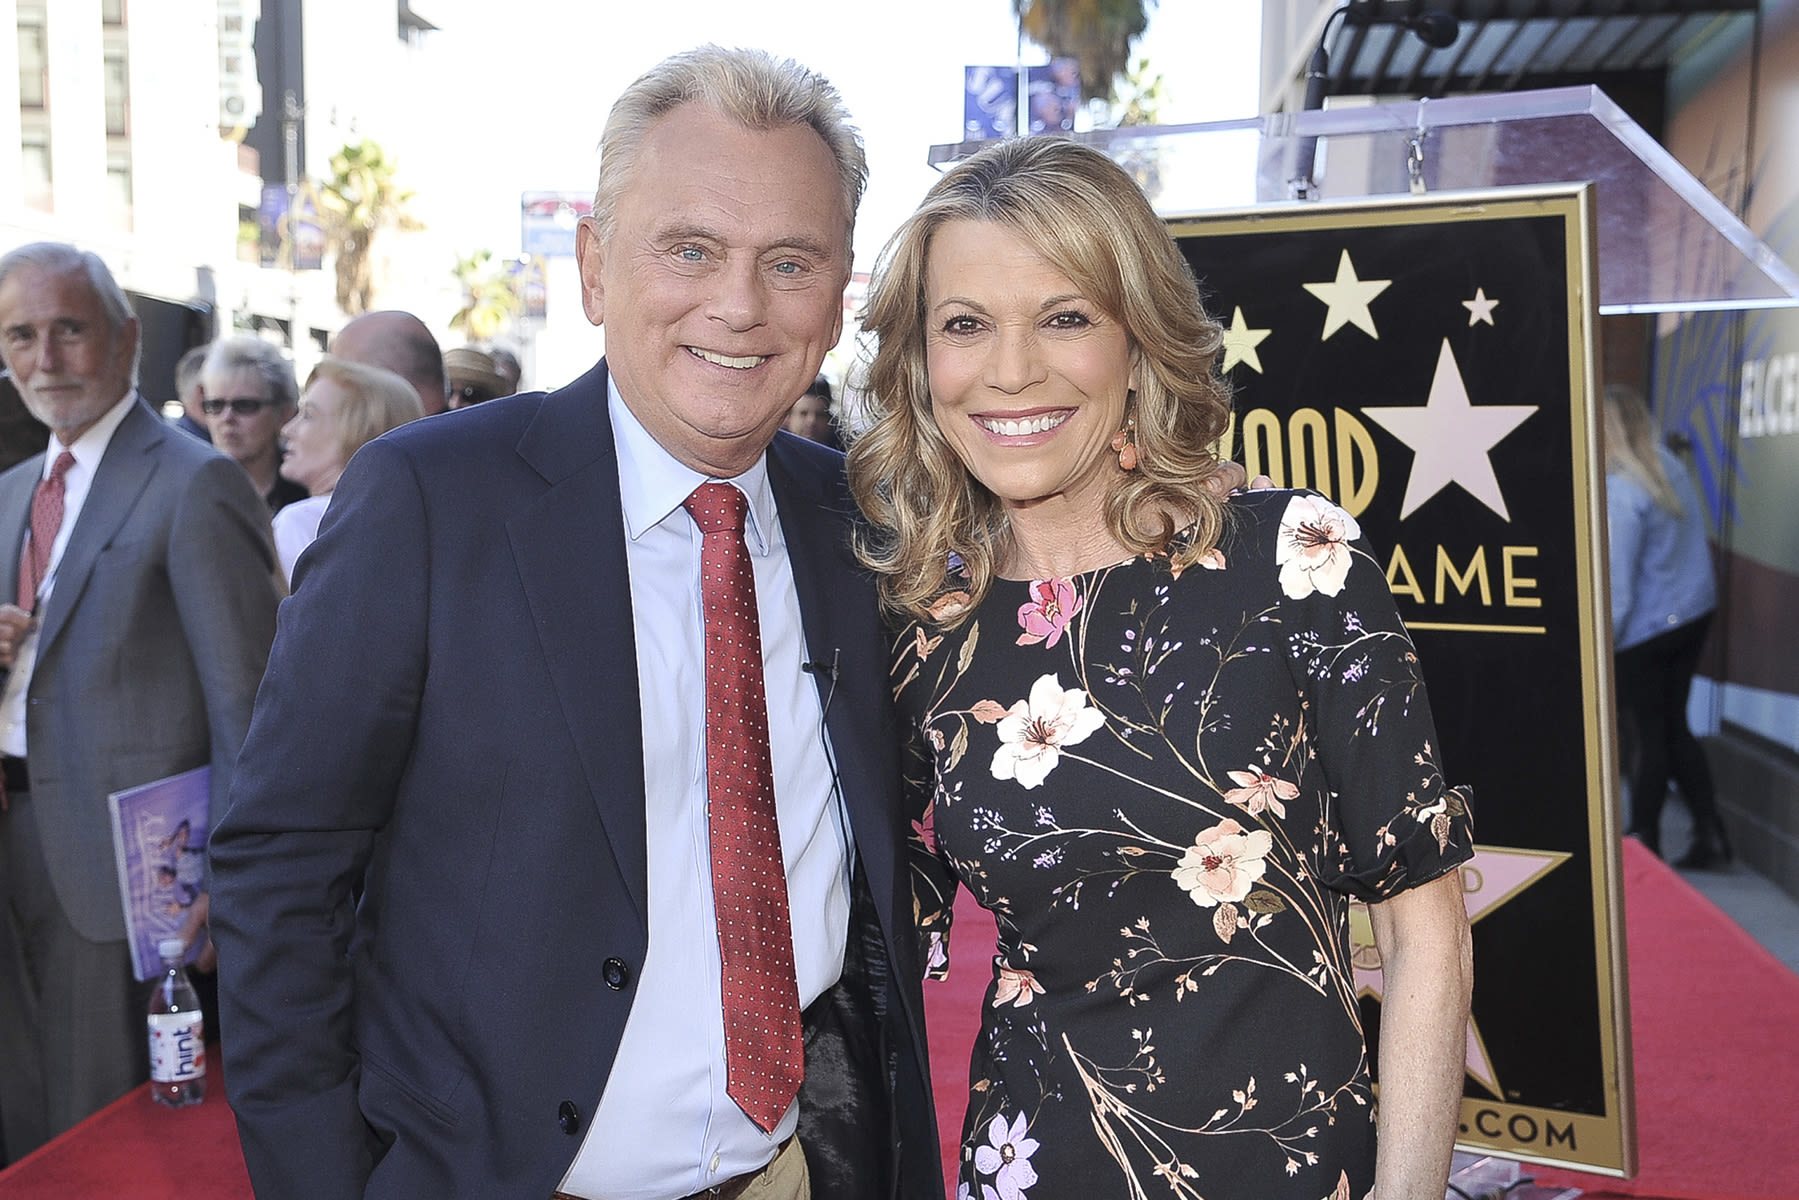 Pat Sajak's final episode as 'Wheel of Fortune' host is almost here